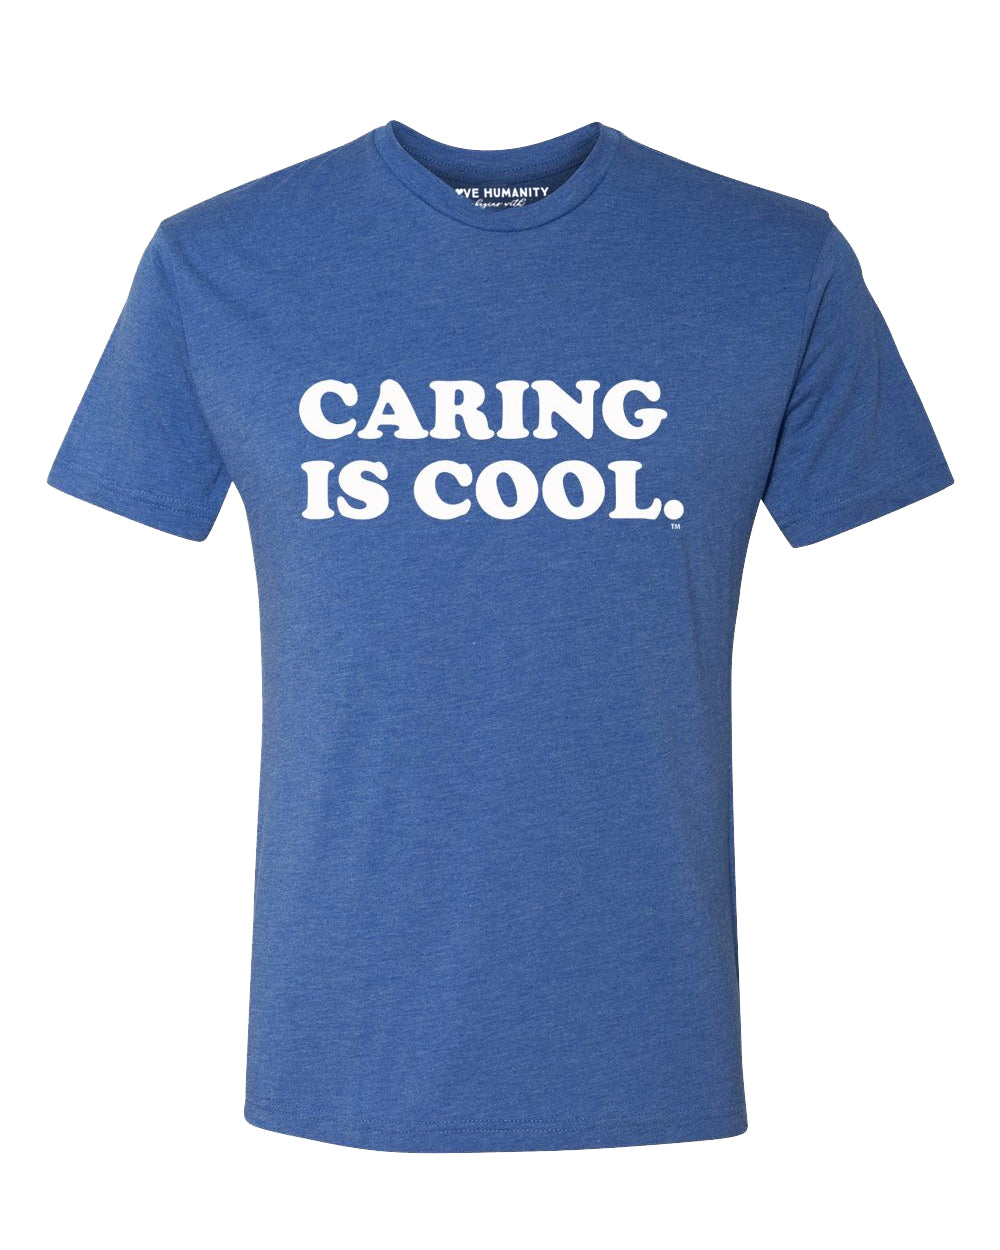 Caring is Cool™ Premium TriBlend T